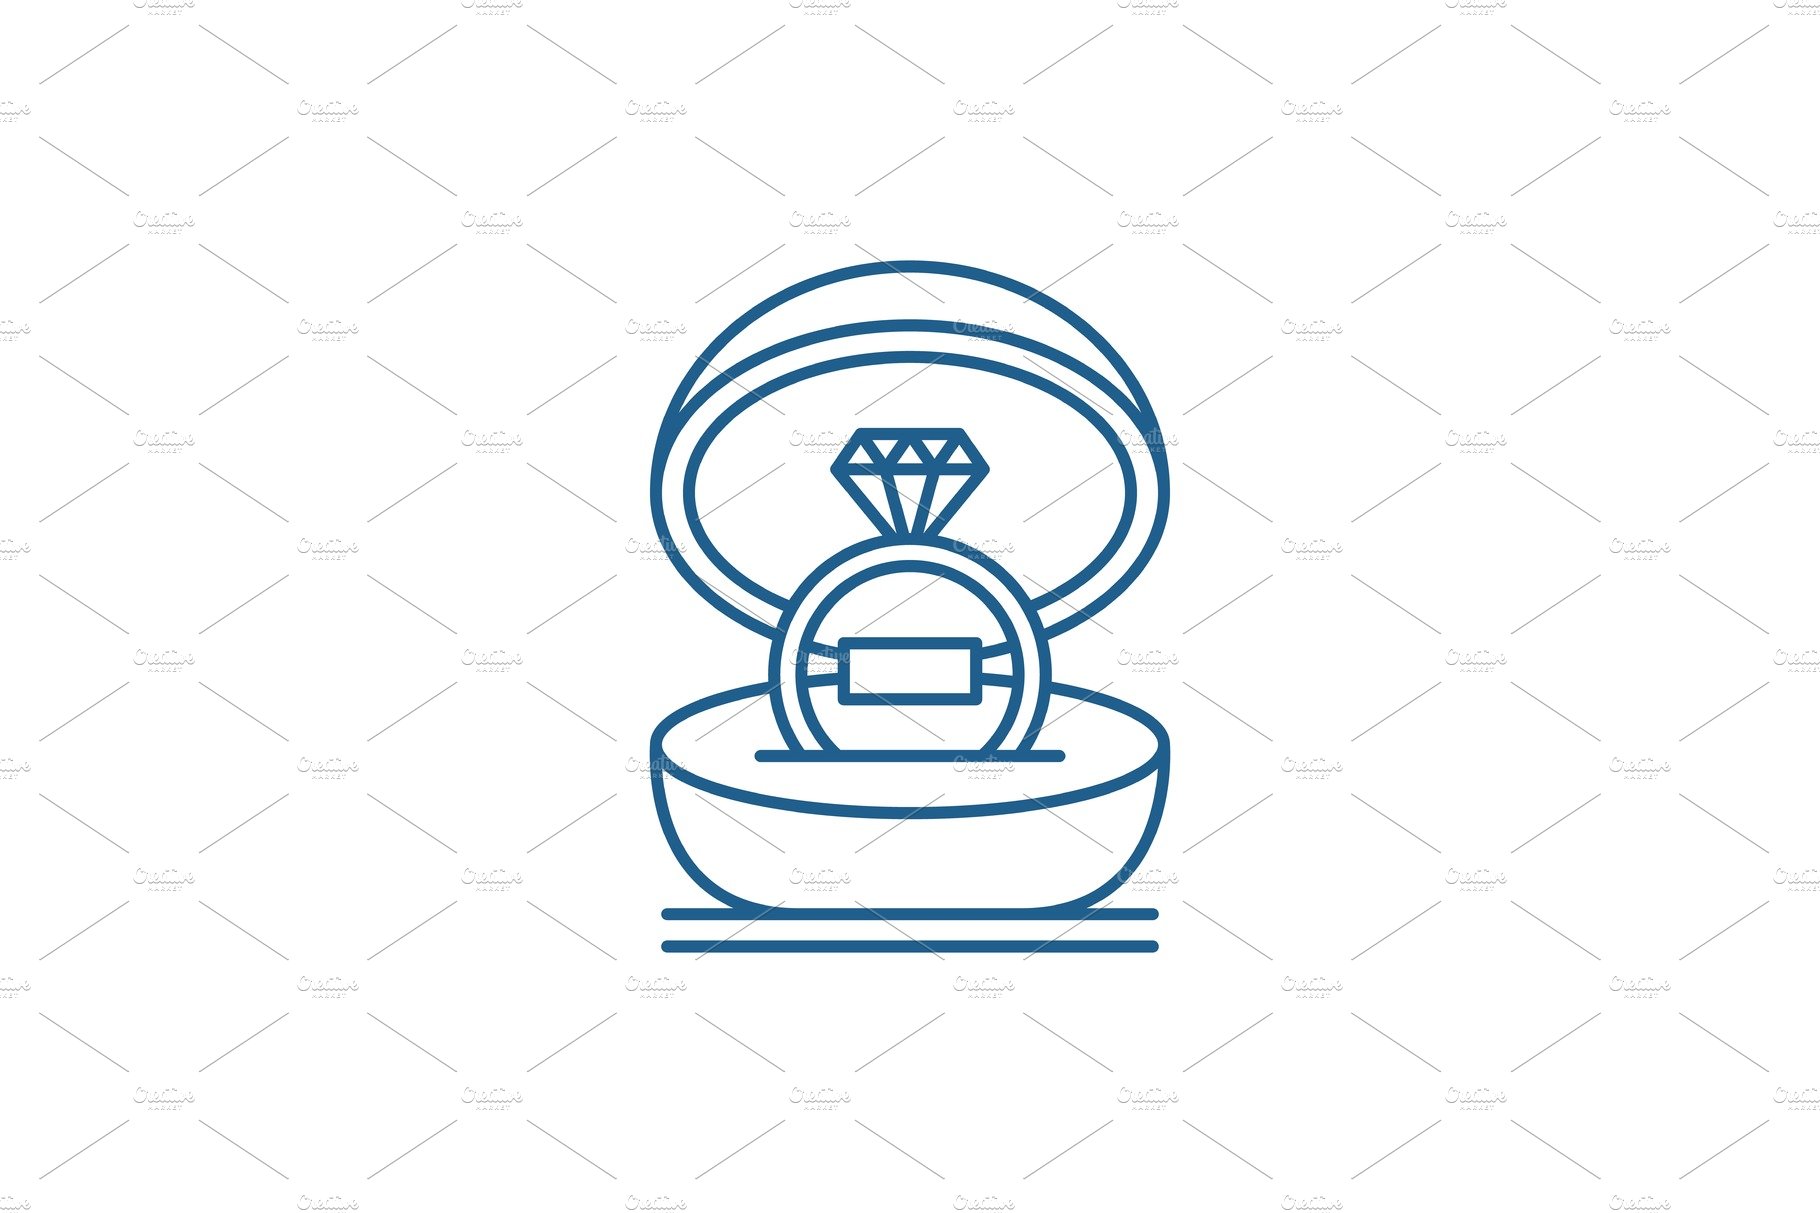 Marriage ceremony line icon concept cover image.